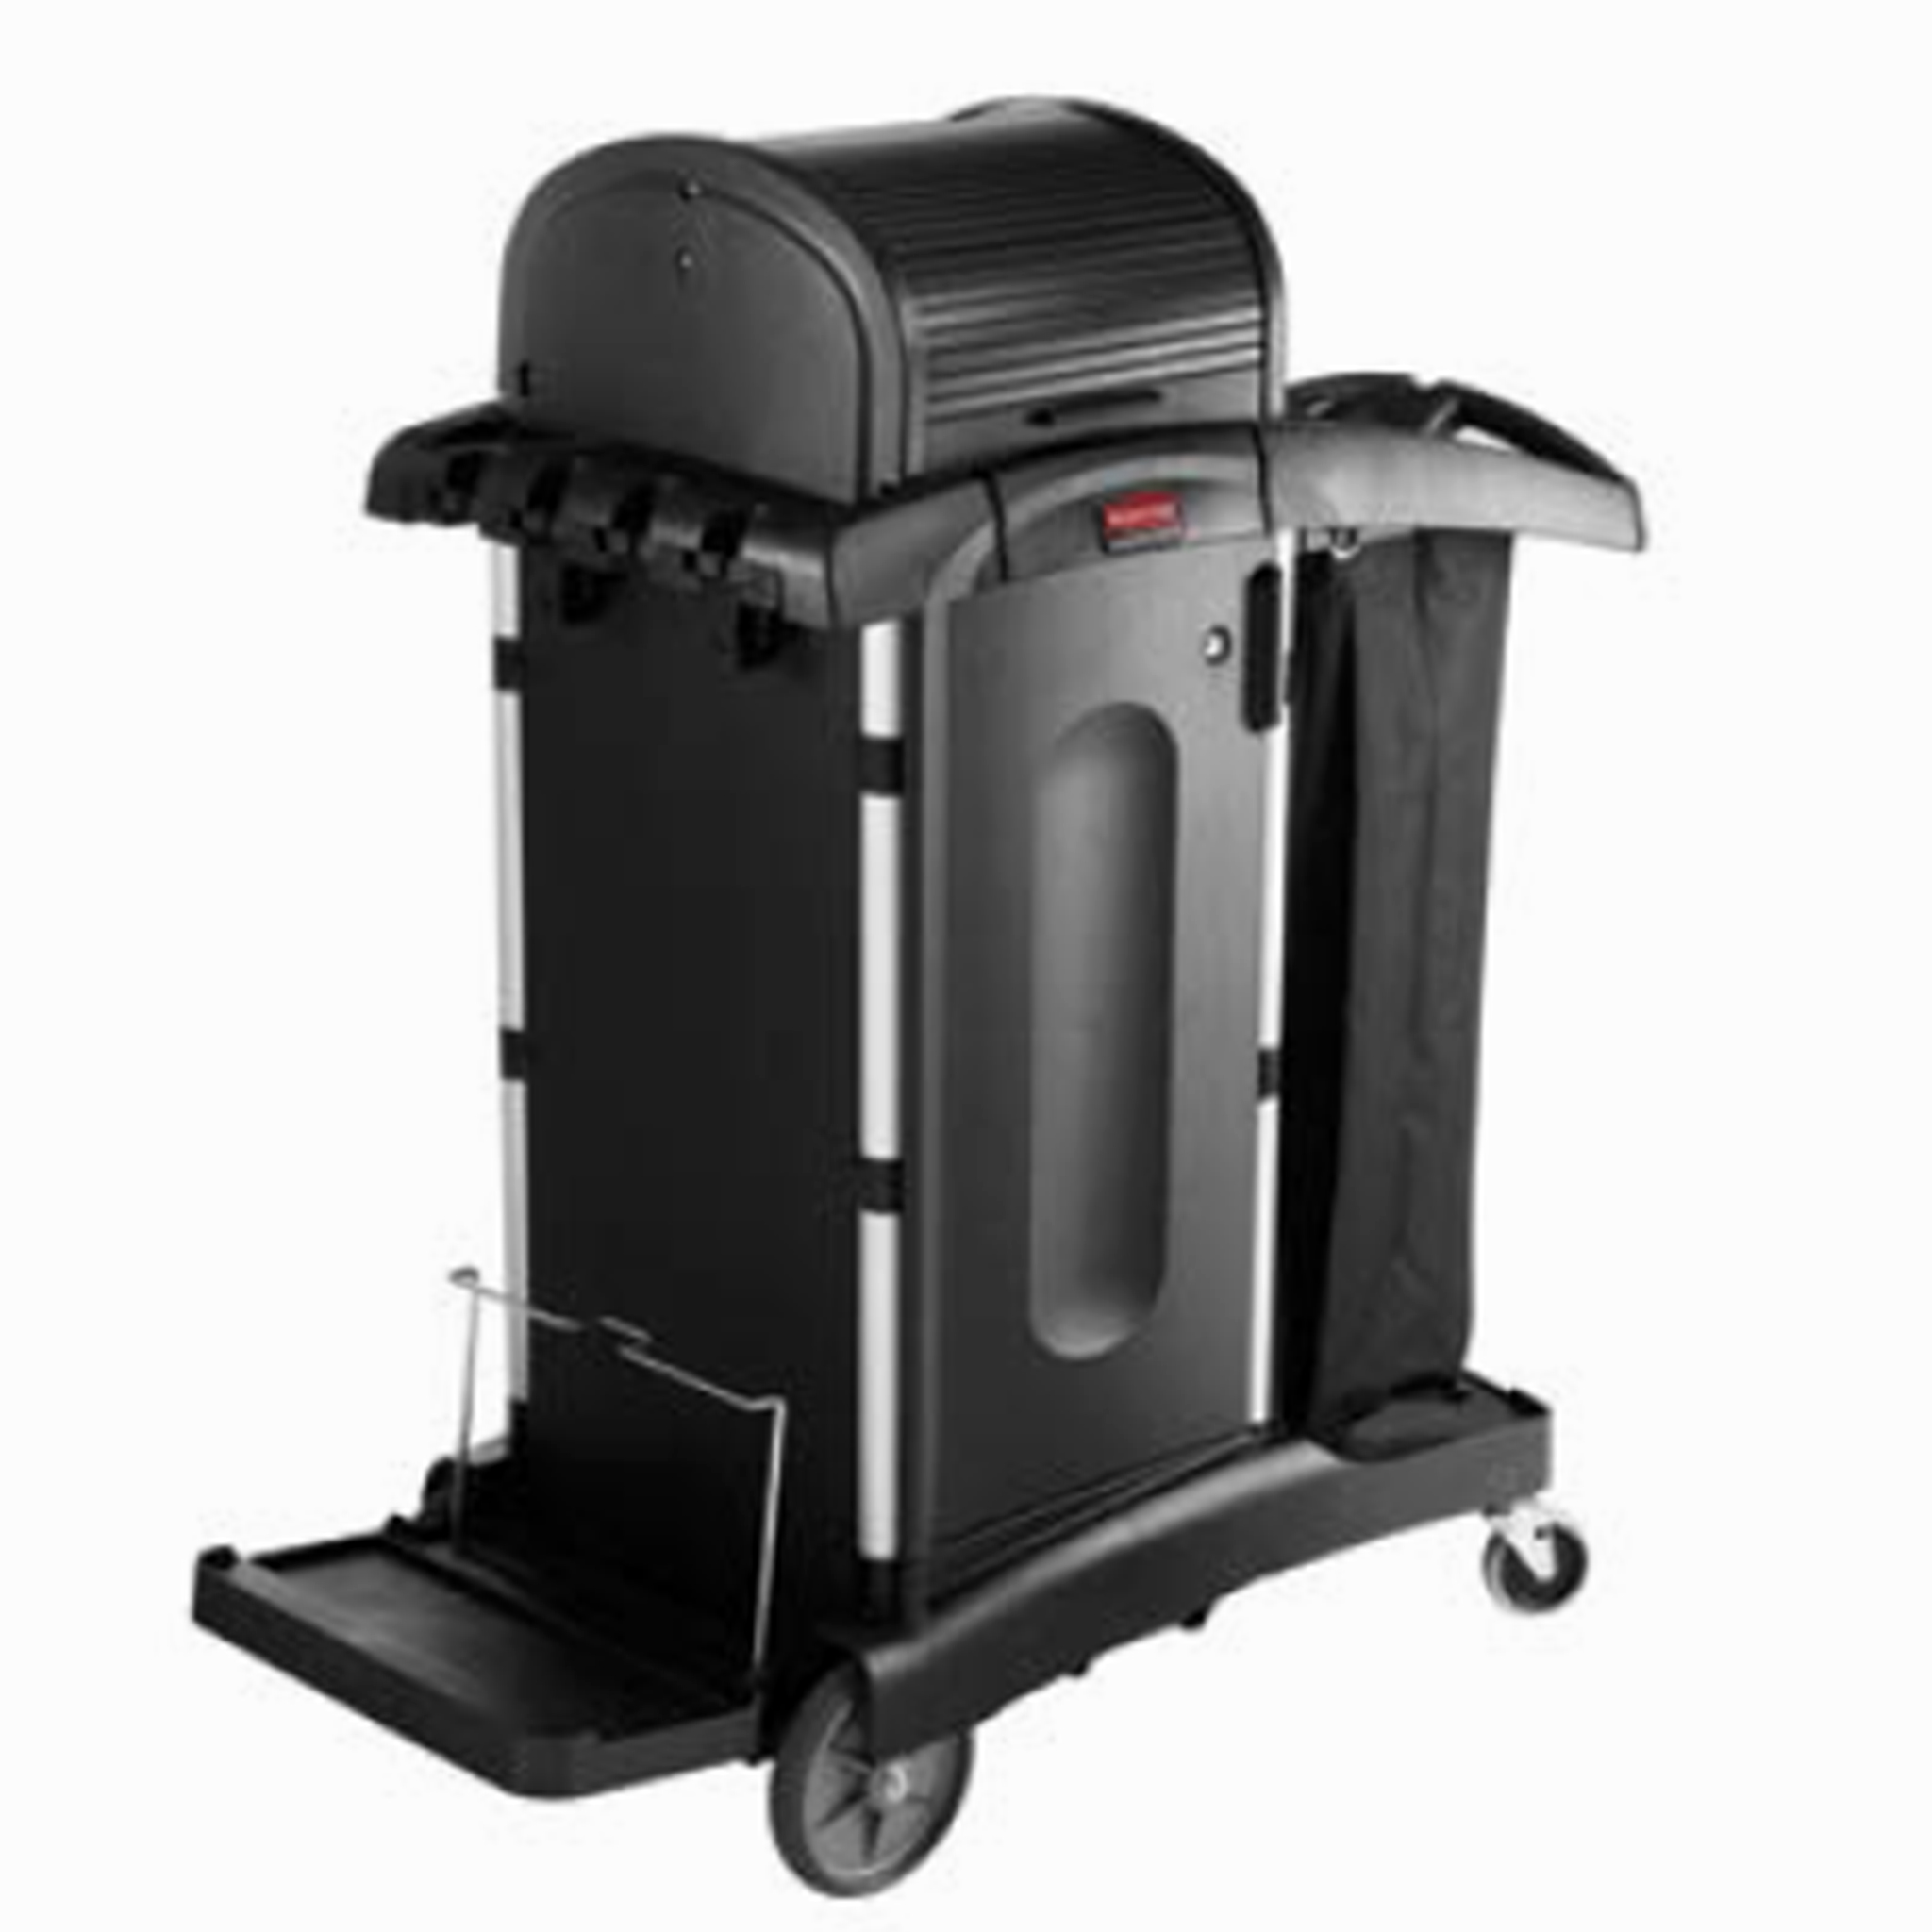 Executive Janitorial Cleaning Cart, High-Security